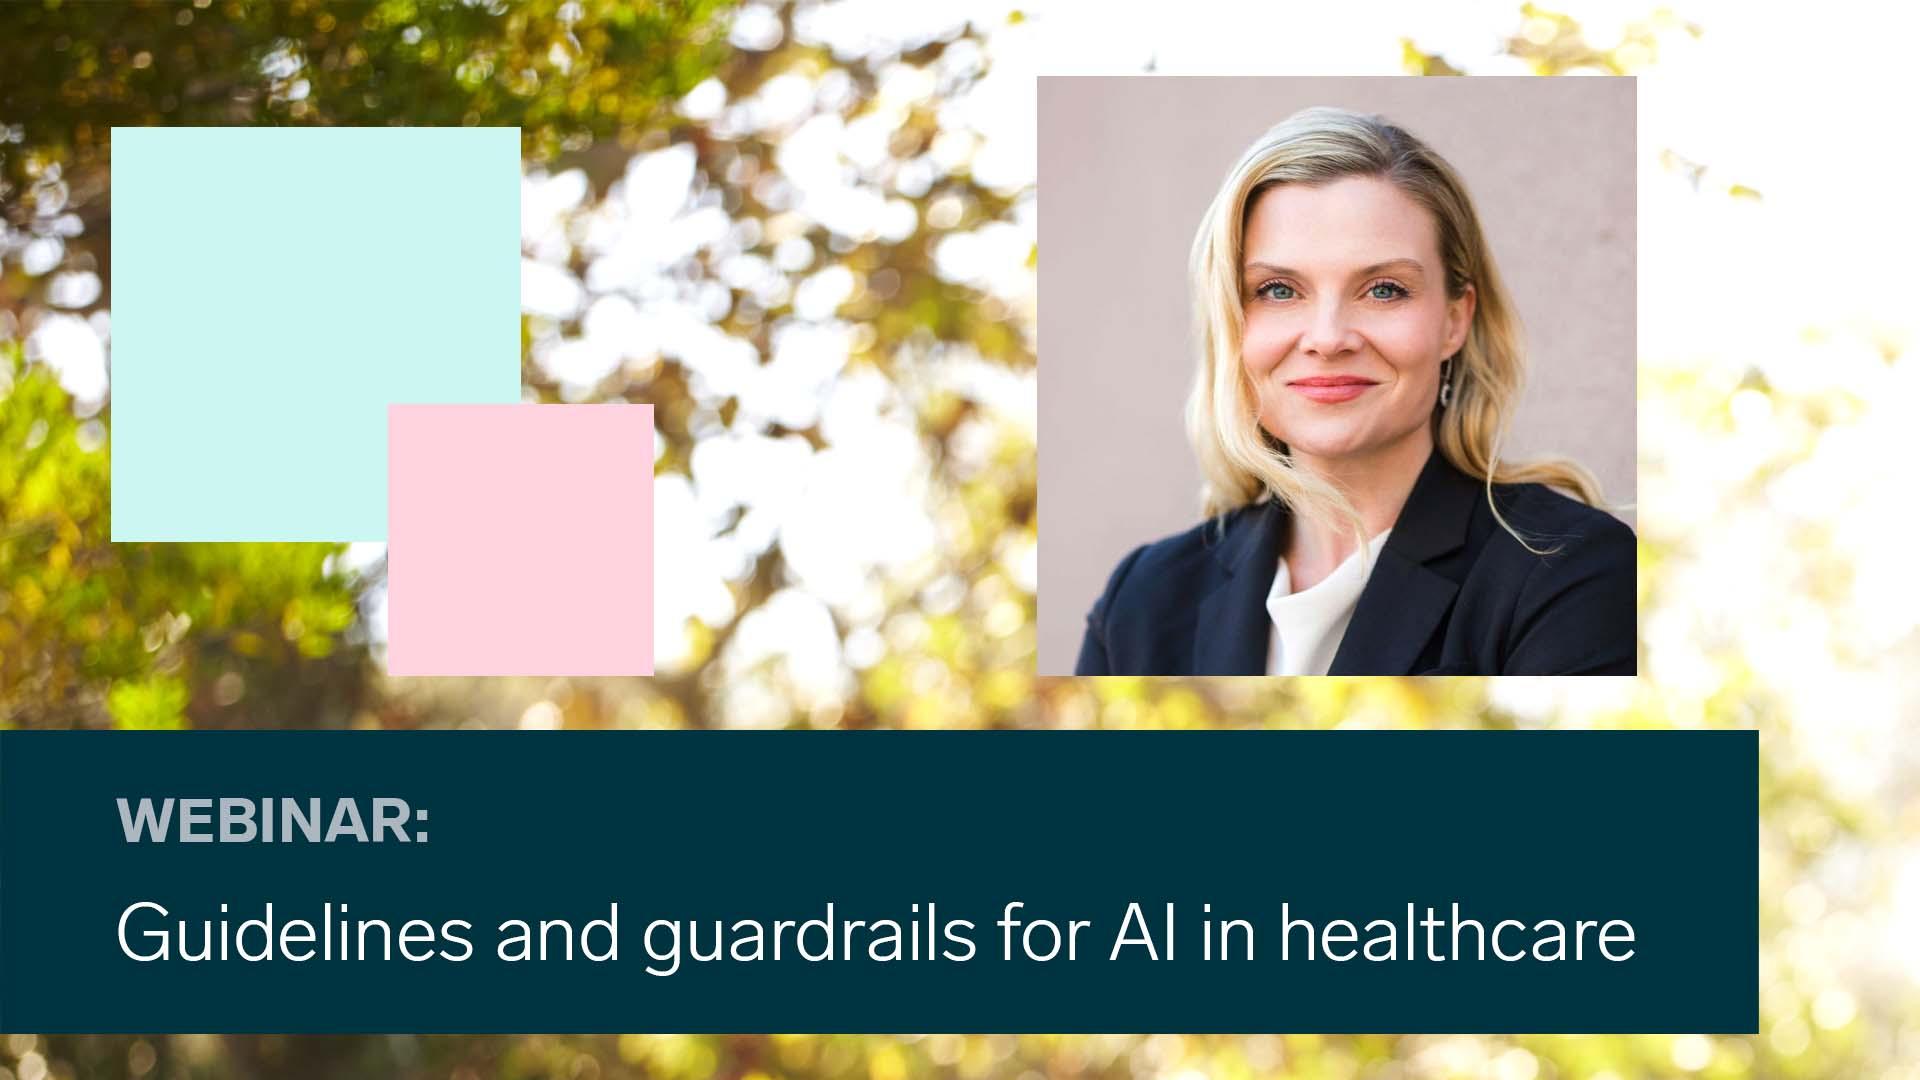 Webinar: Guidelines and guardrails for AI in healthcare